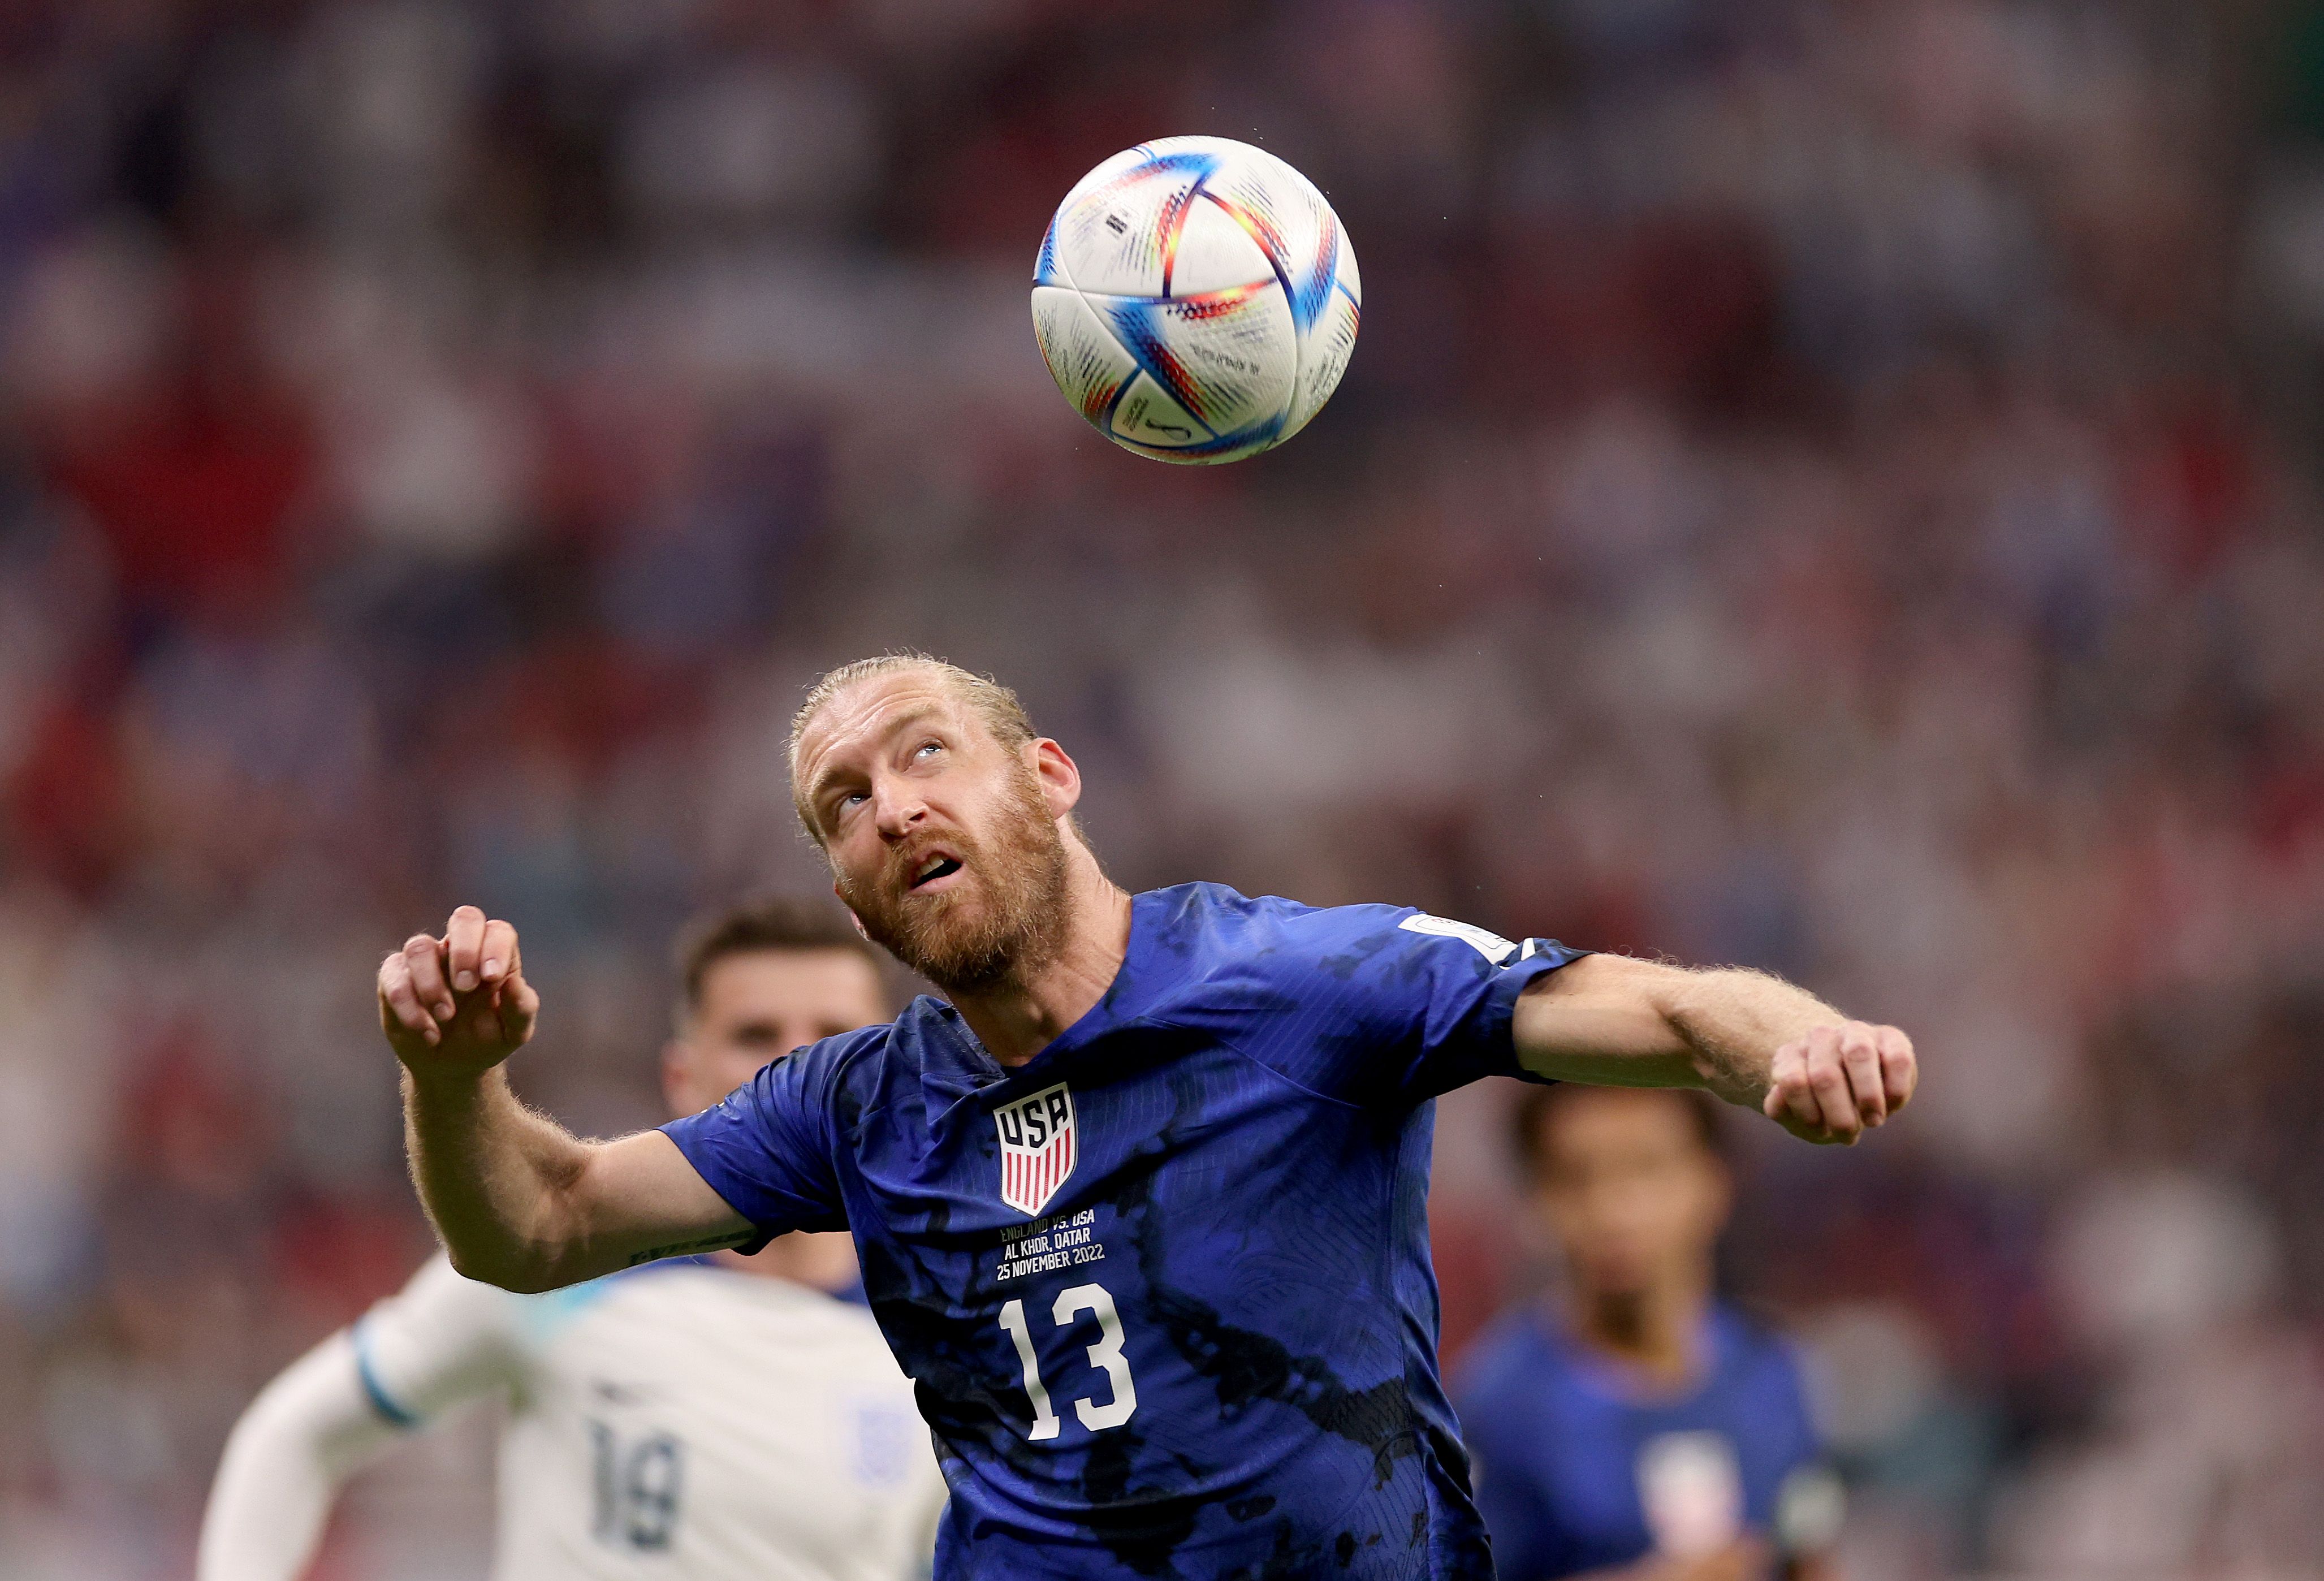 Tim Ream #13 of United States passes the ball in the first half against England 